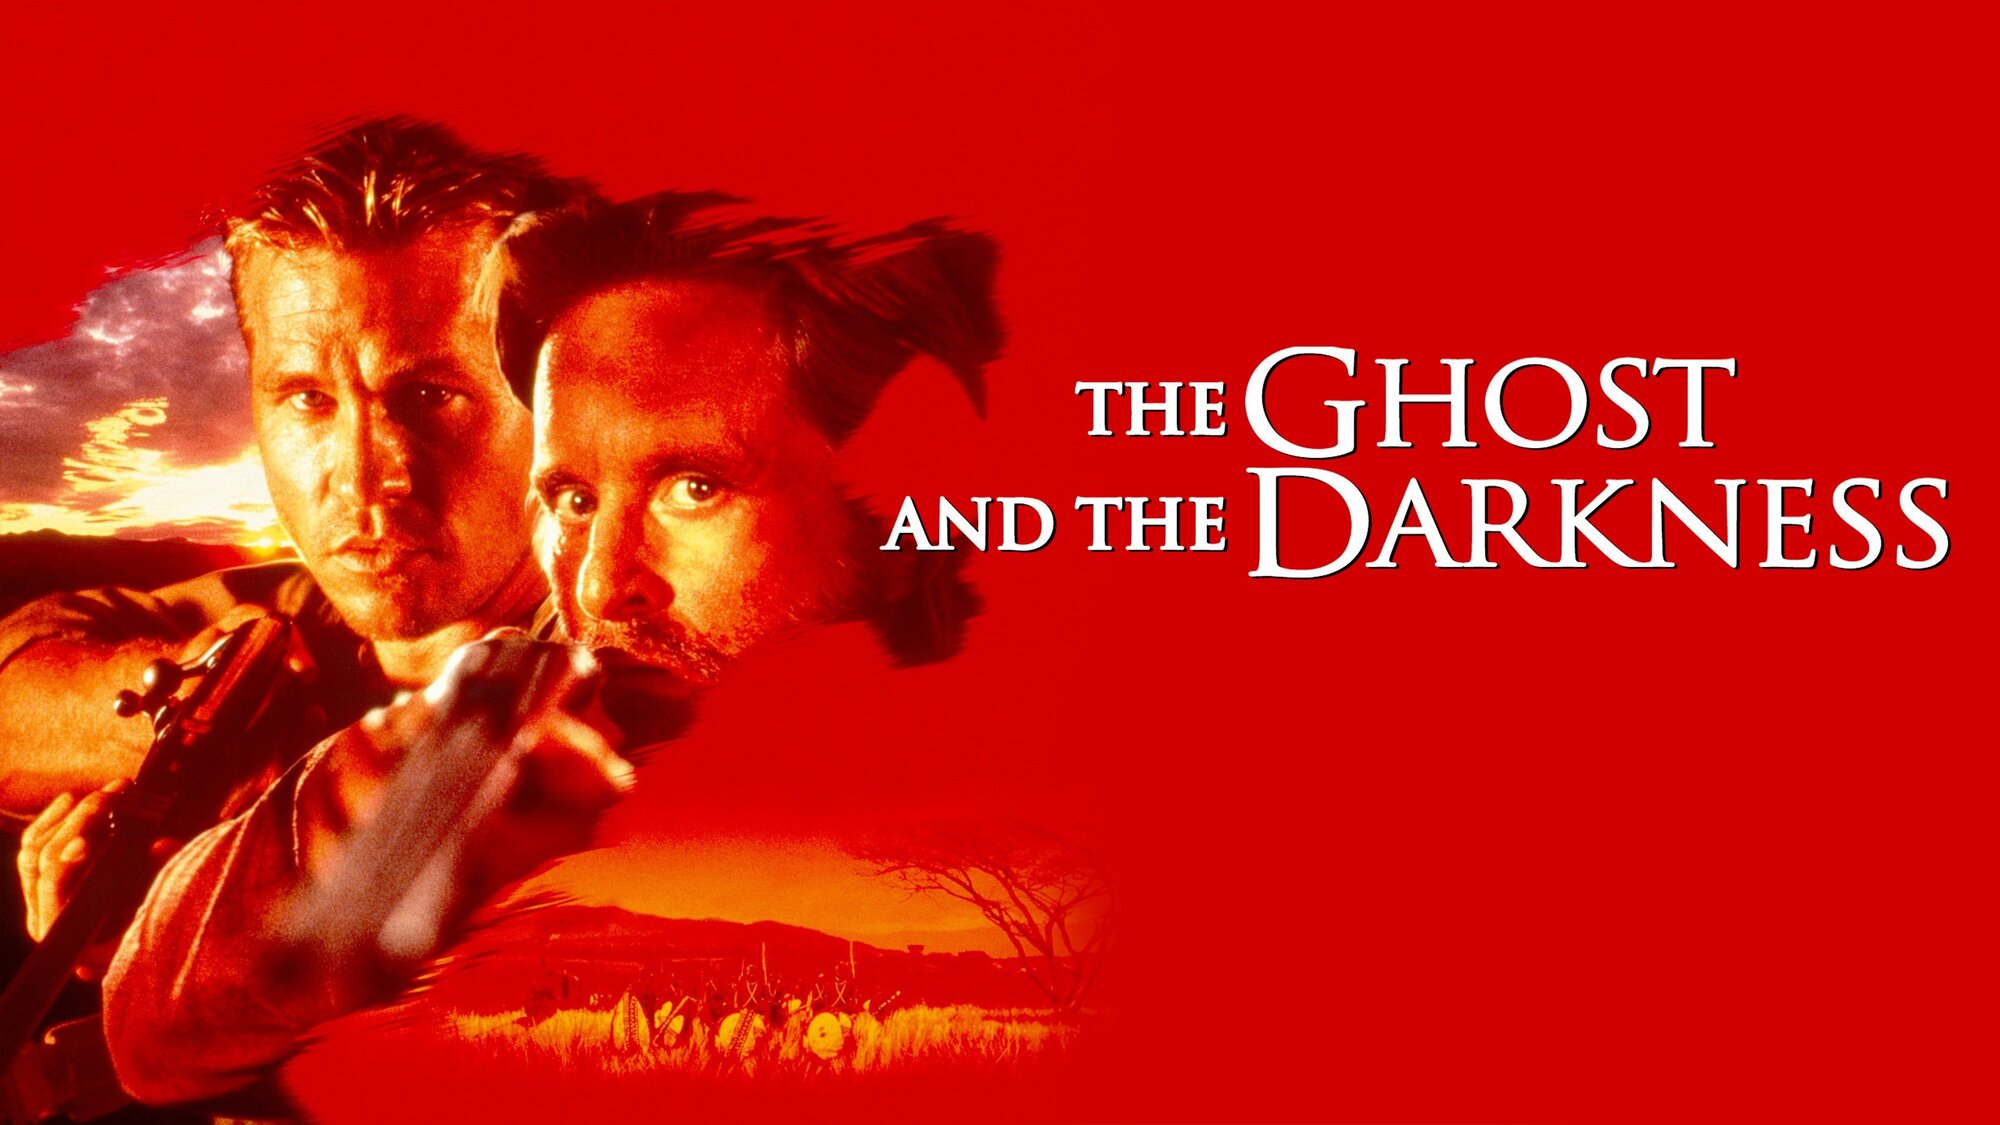 42-facts-about-the-movie-the-ghost-and-the-darkness